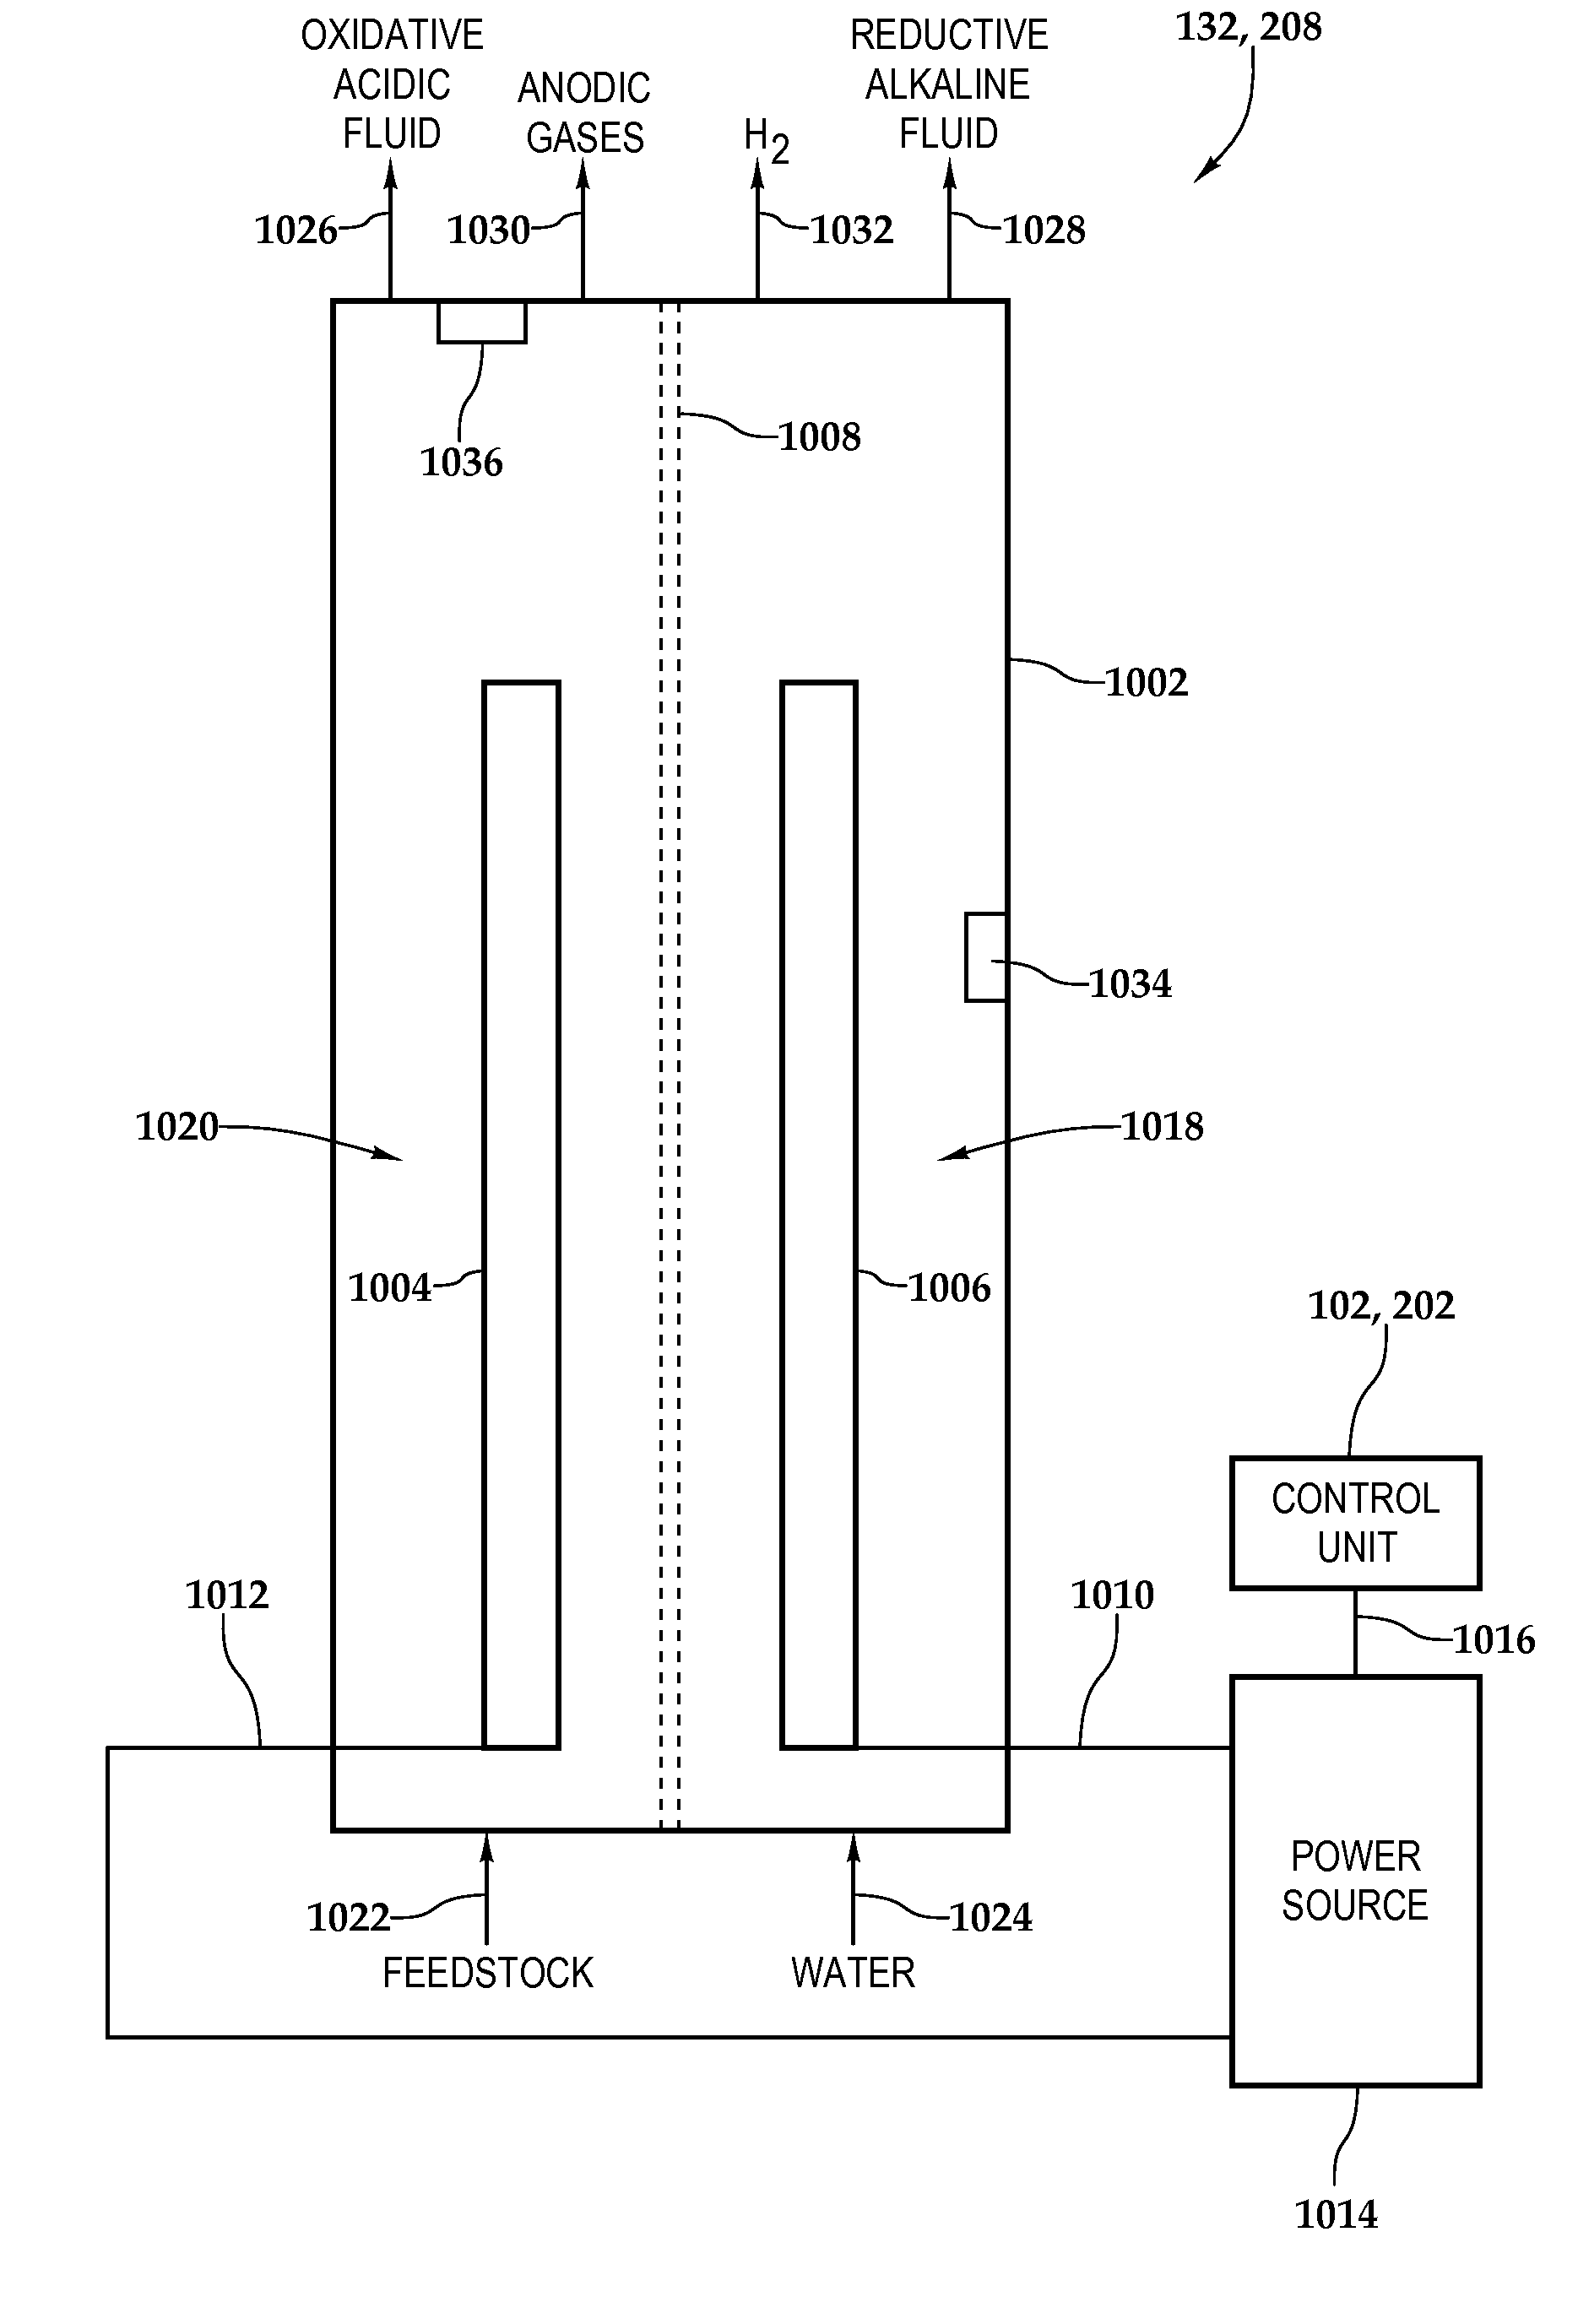 Electrolytic System and Method for Generating Biocides Having an Electron Deficient Carrier Fluid and Chlorine Dioxide